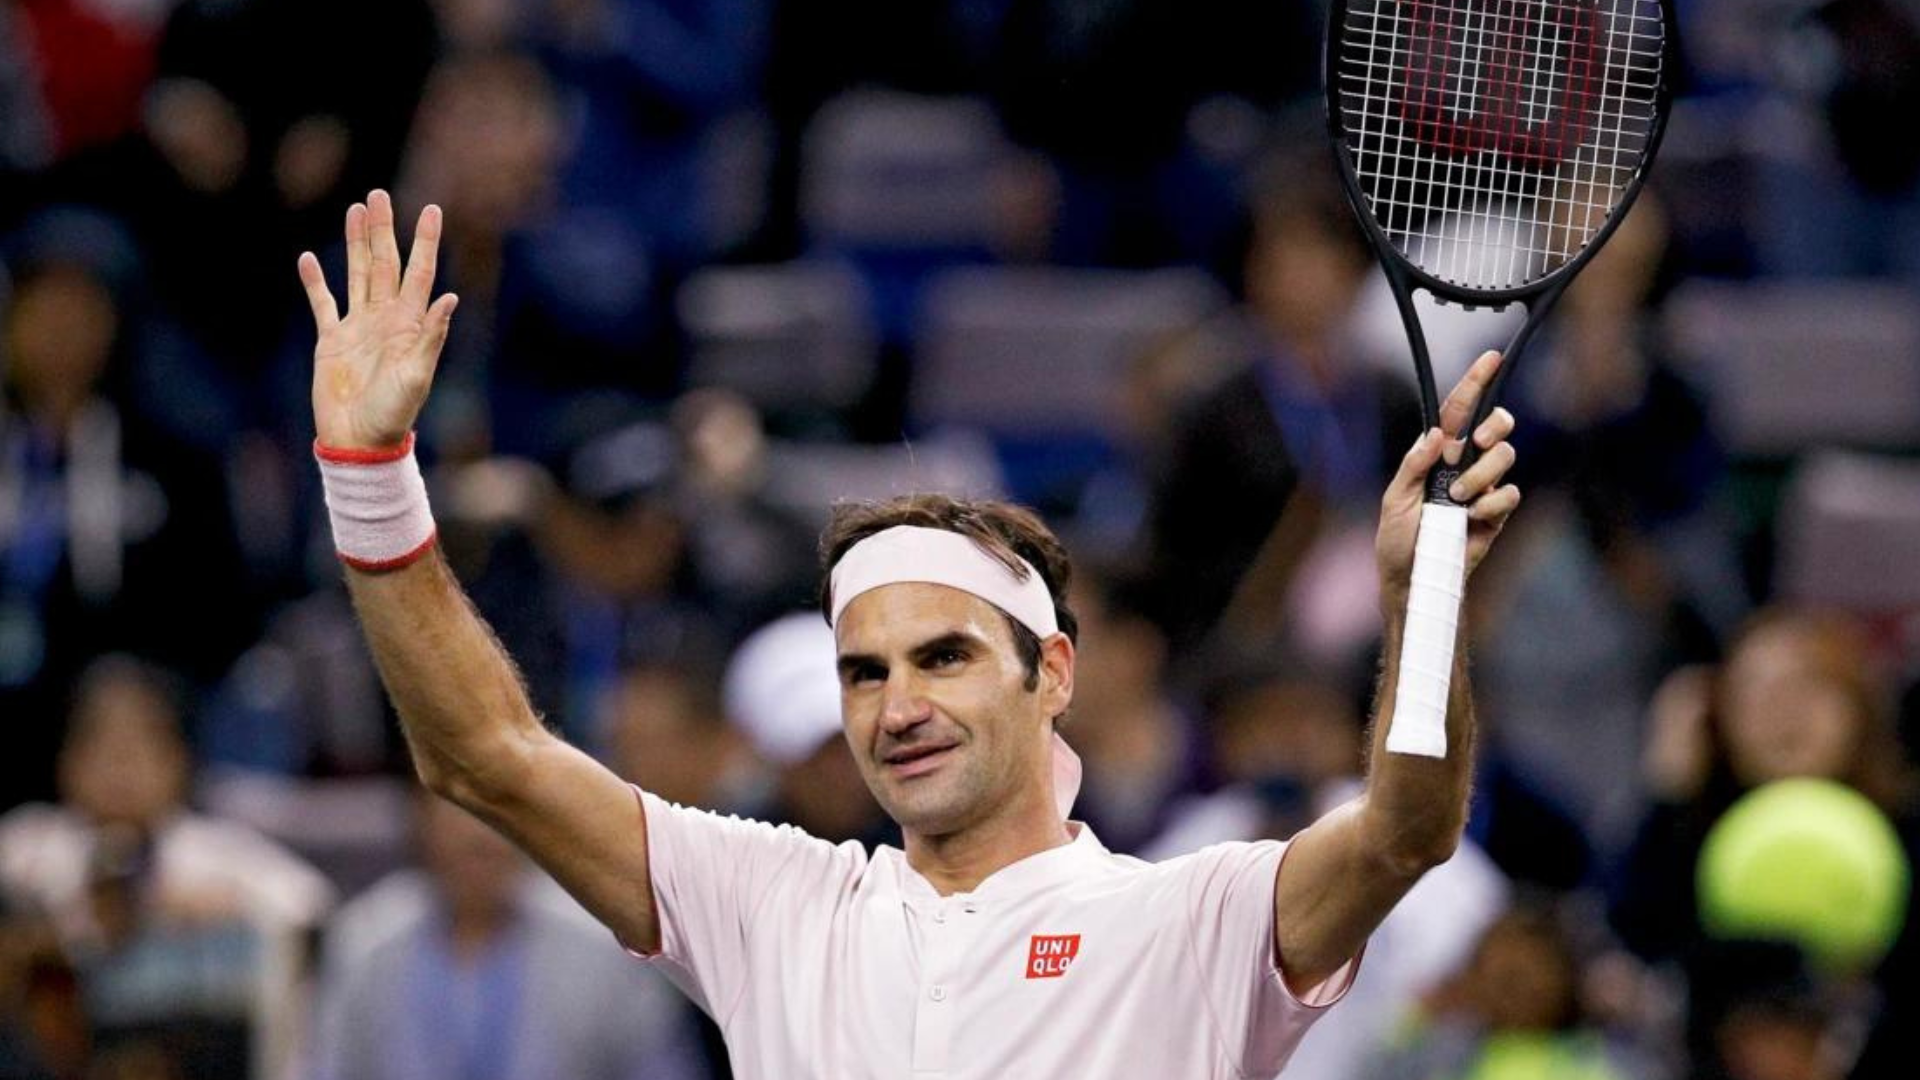 Roger Federer holding a tennis rocket with his hands raised up high